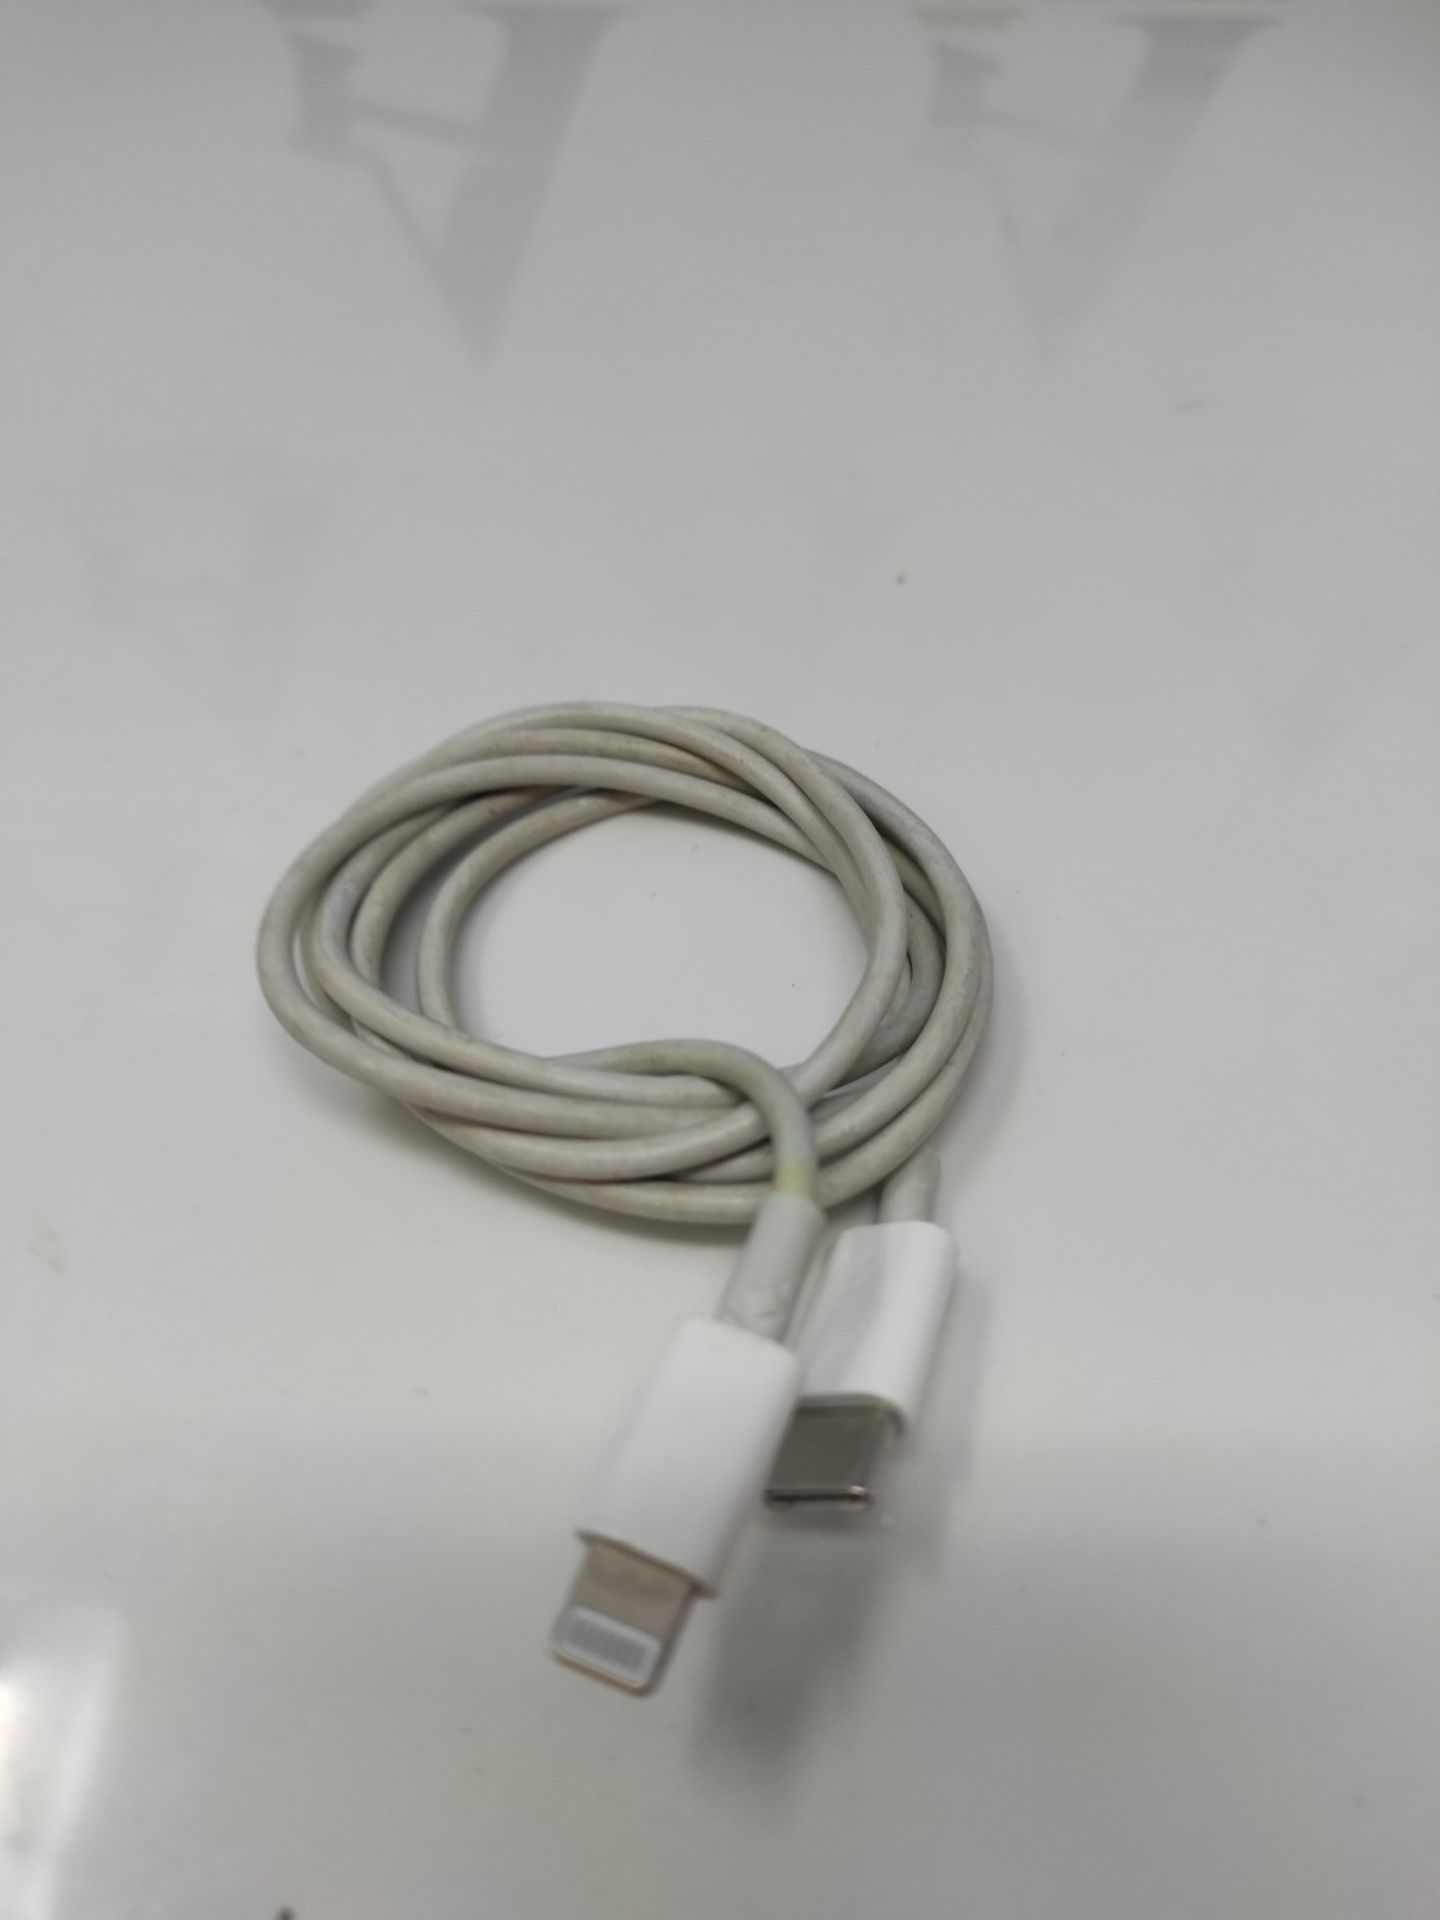 Apple Lightning to USB-C Cable (1m), Tablet - Image 3 of 6